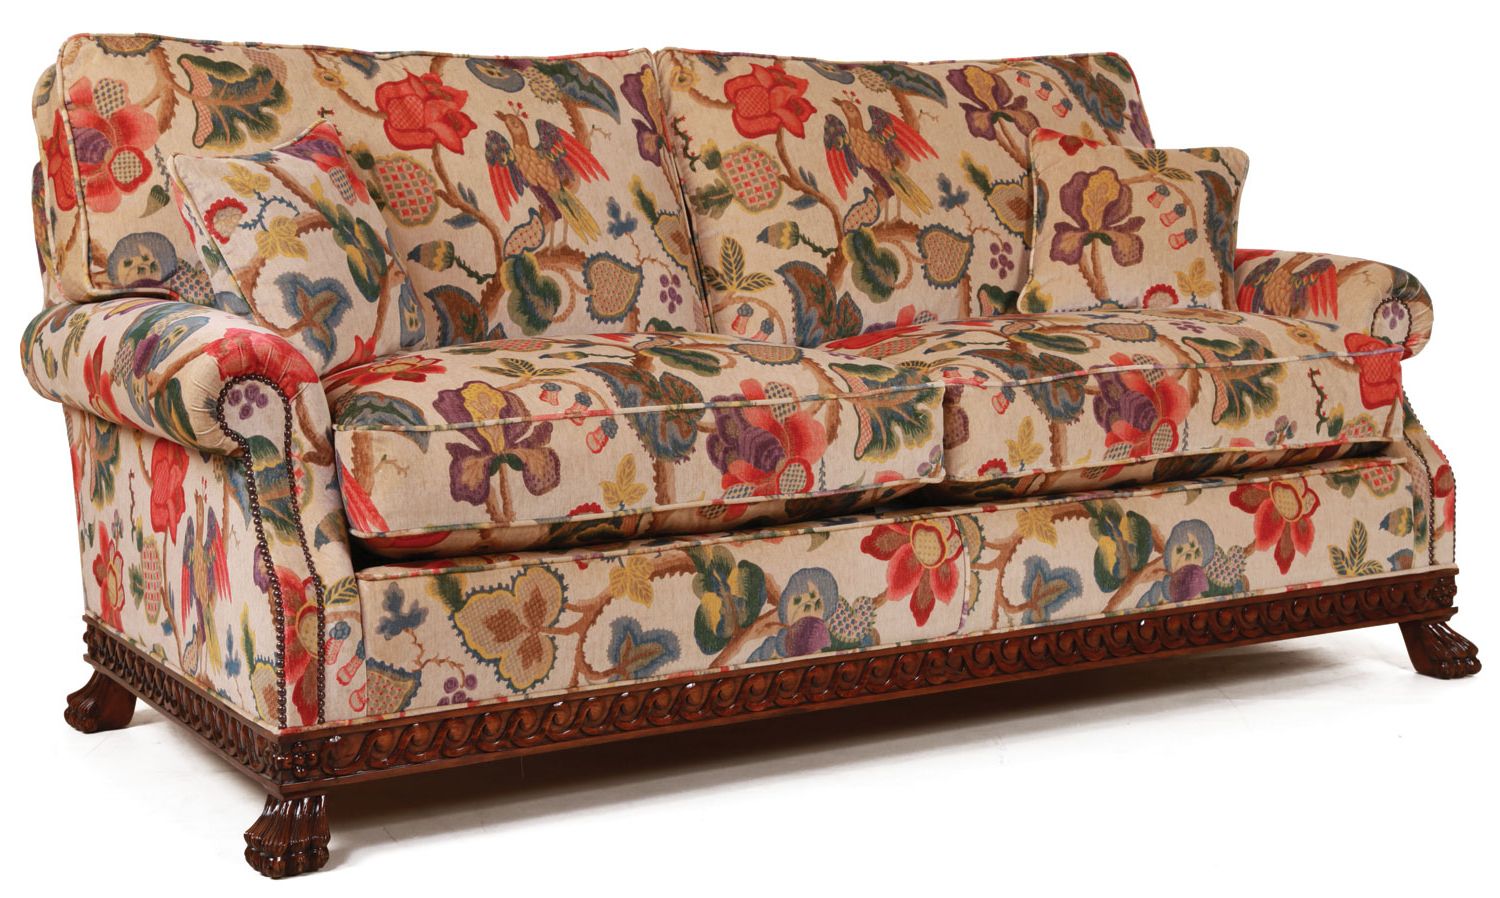 Dartington Sofa In A Floral Print Velvet, Fabric Sofas In Stock From Within Sofas In Pattern (View 16 of 20)